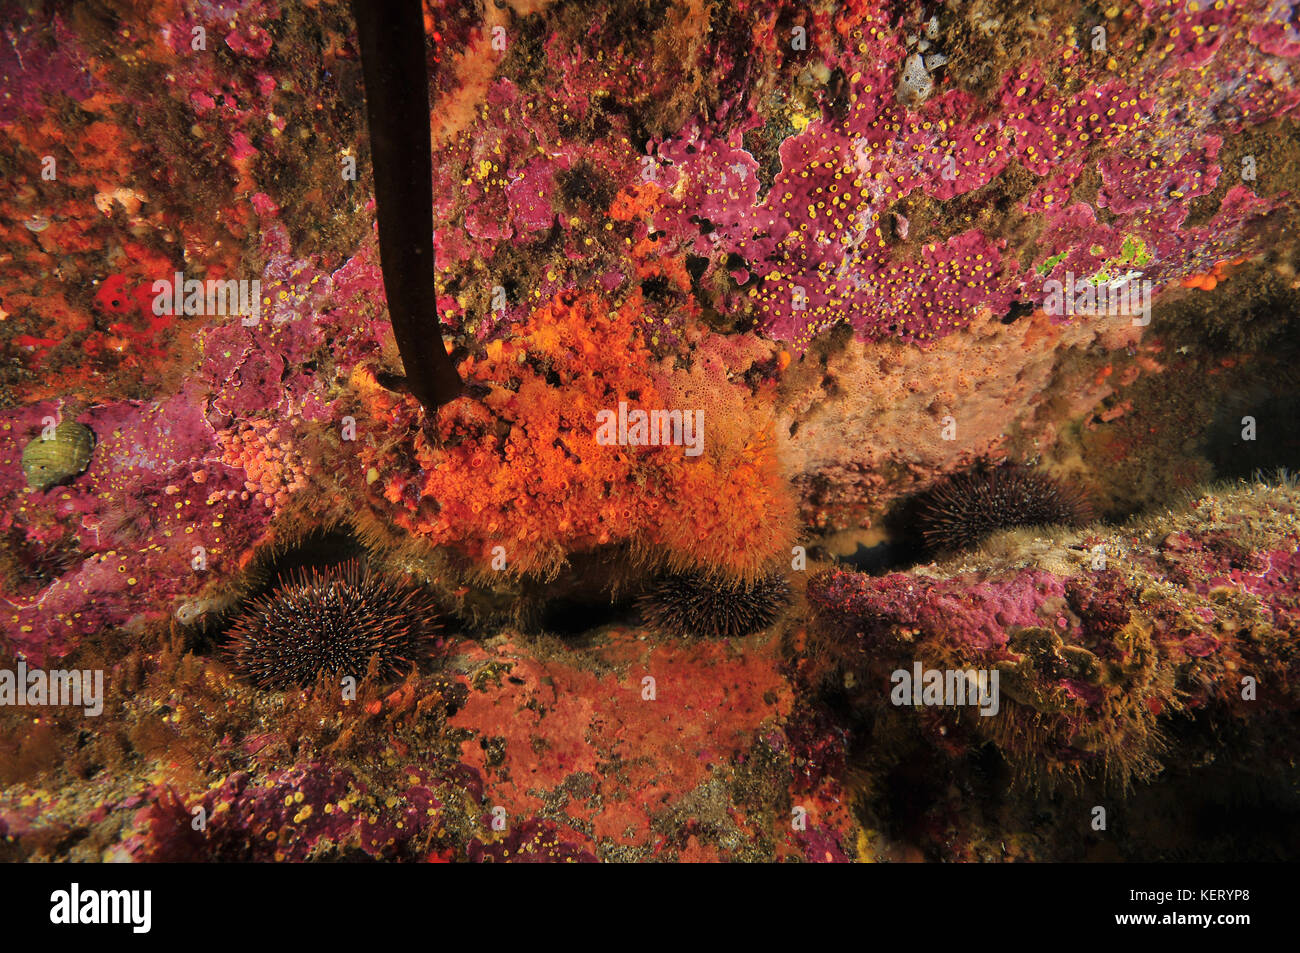 Rocky wall covered with colourful encrusting invertebrates and pink coralline algae with sea urchins hiding in cracks. Stock Photo